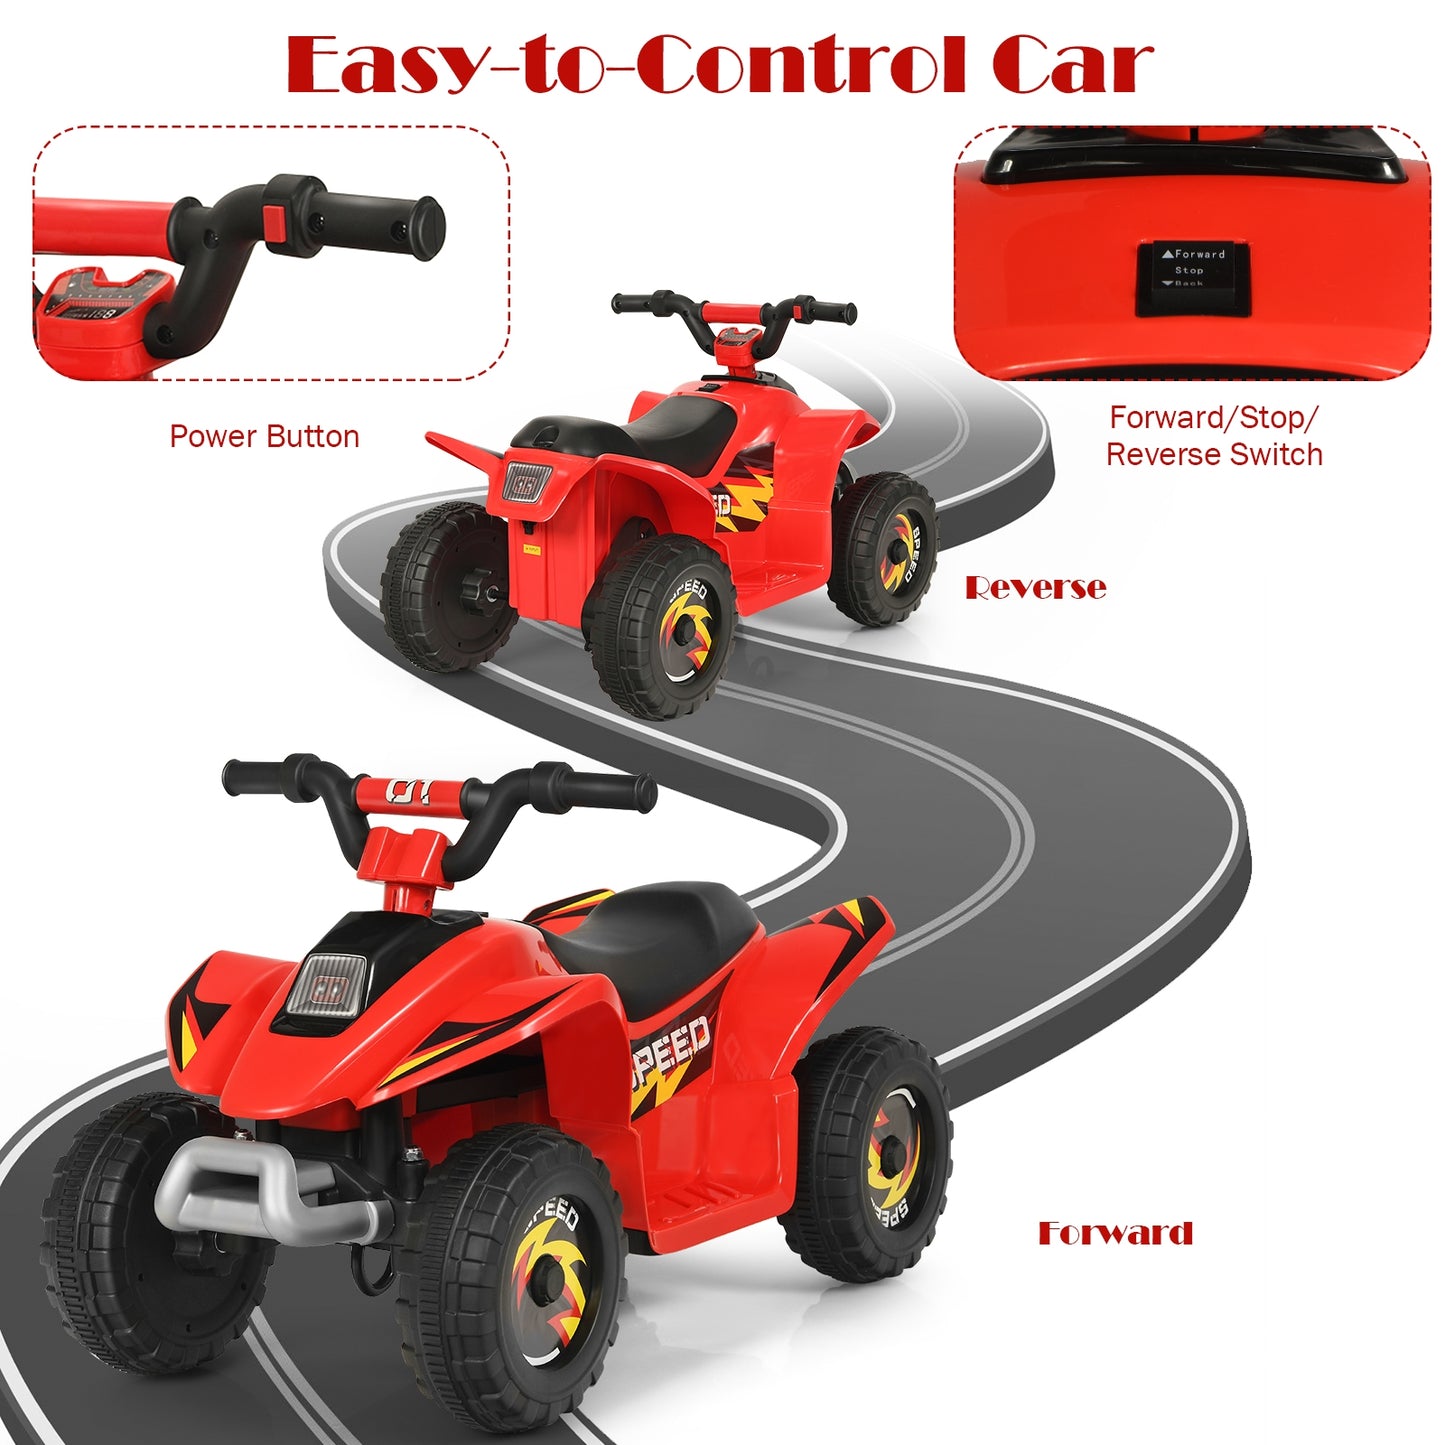 6V Kids Electric ATV 4 Wheels Ride-On Toy -Red